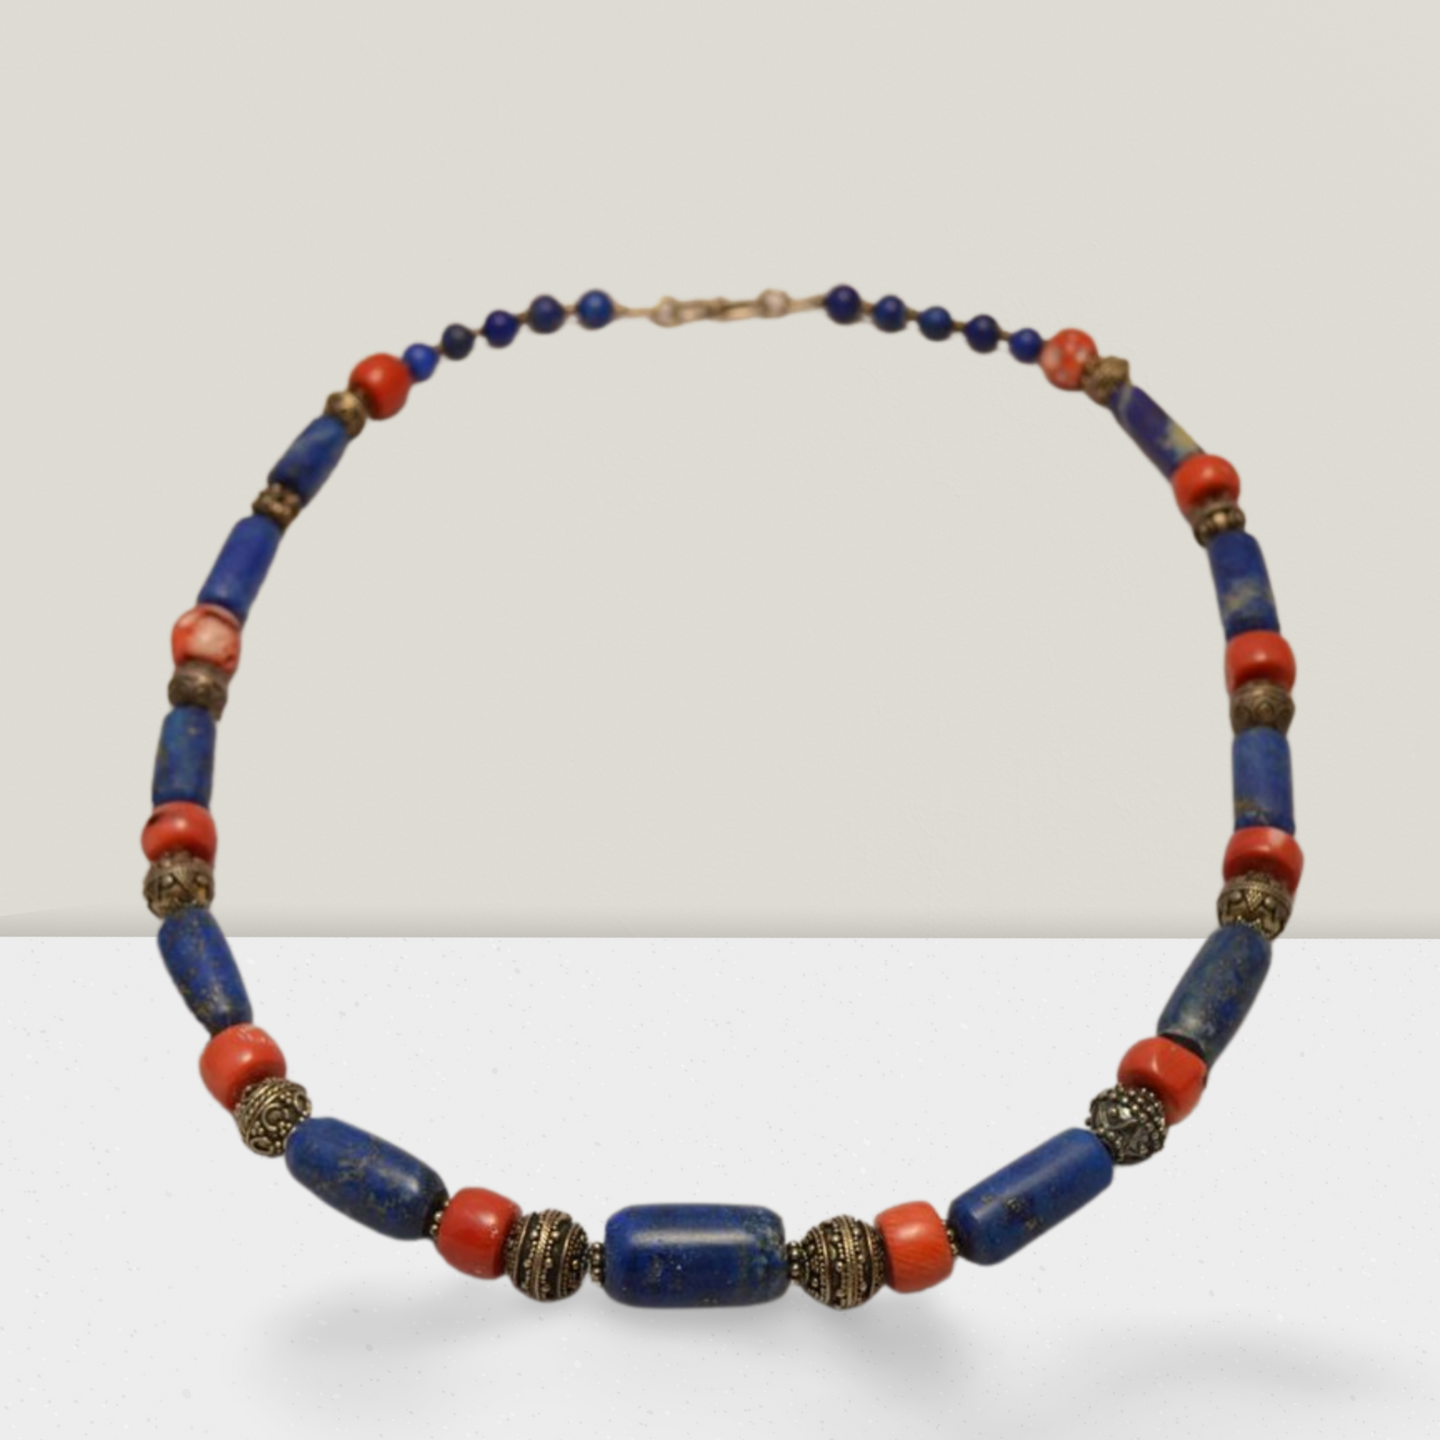 Necklace with Lapis Lazuli & Red Coral and sterling silver elements